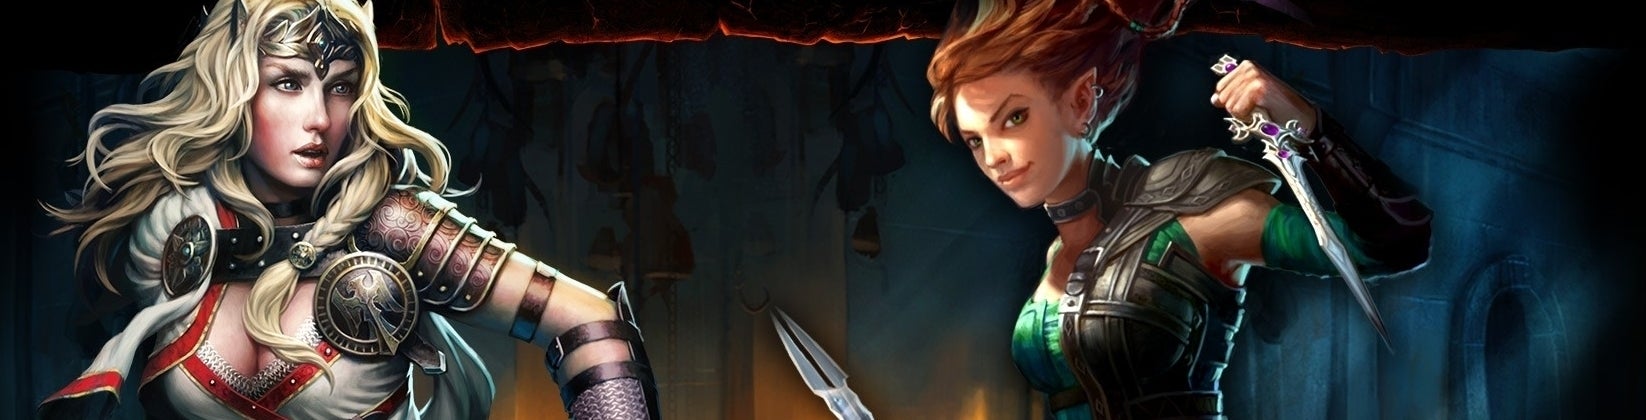 Image for RECENZE Neverwinter, Free-2-Play dle Dungeons and Dragons